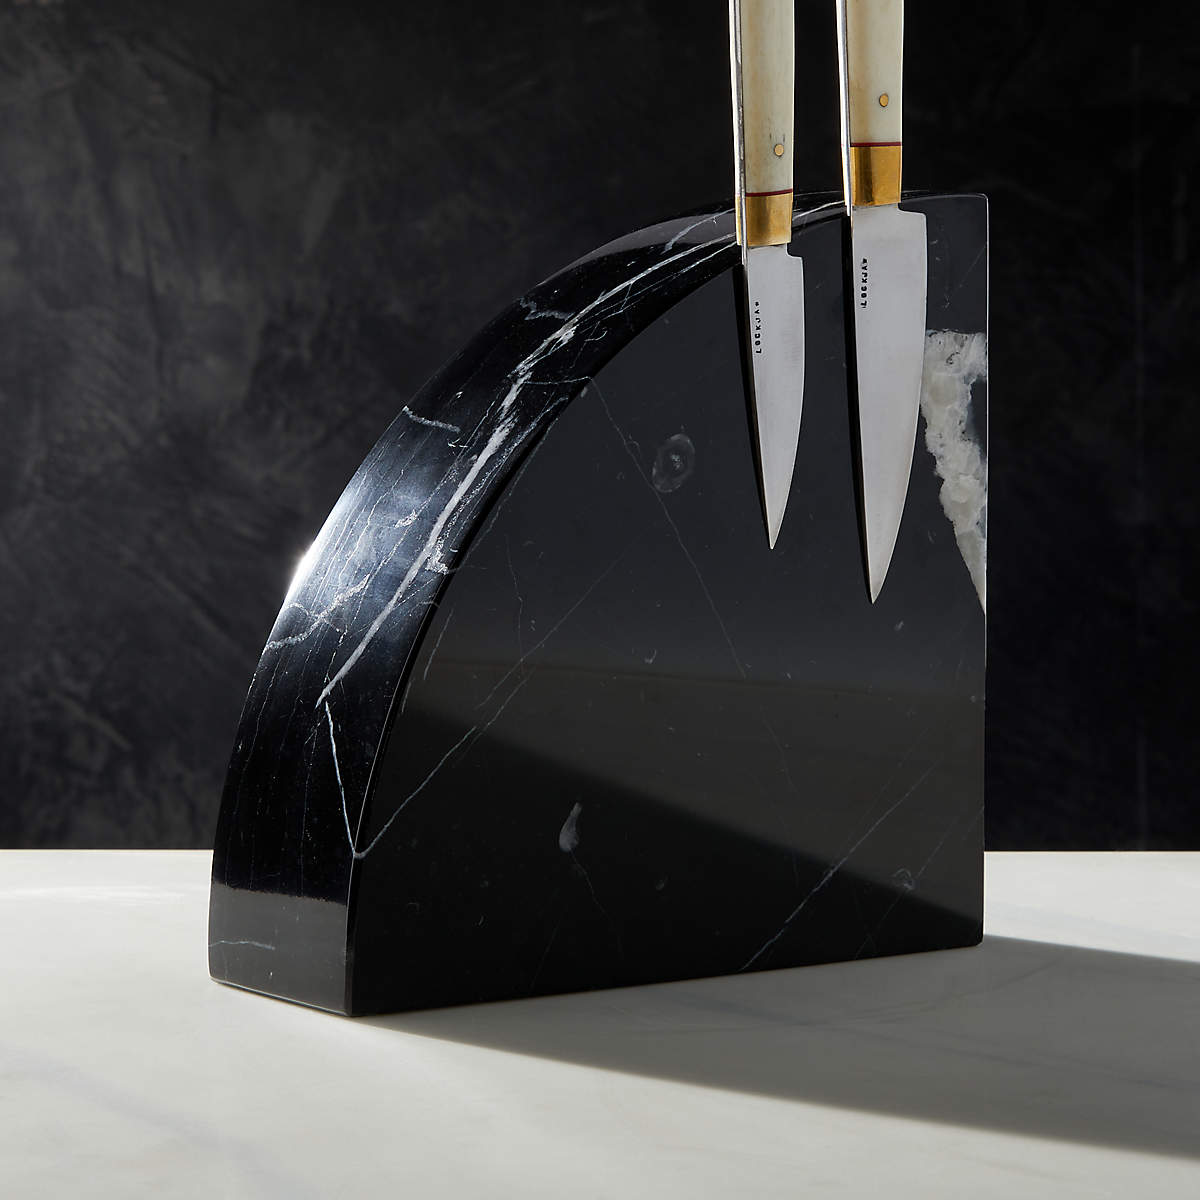 Sharp Black Marble Magnetic Knife Block- image 2 of 3 (Open Larger View)